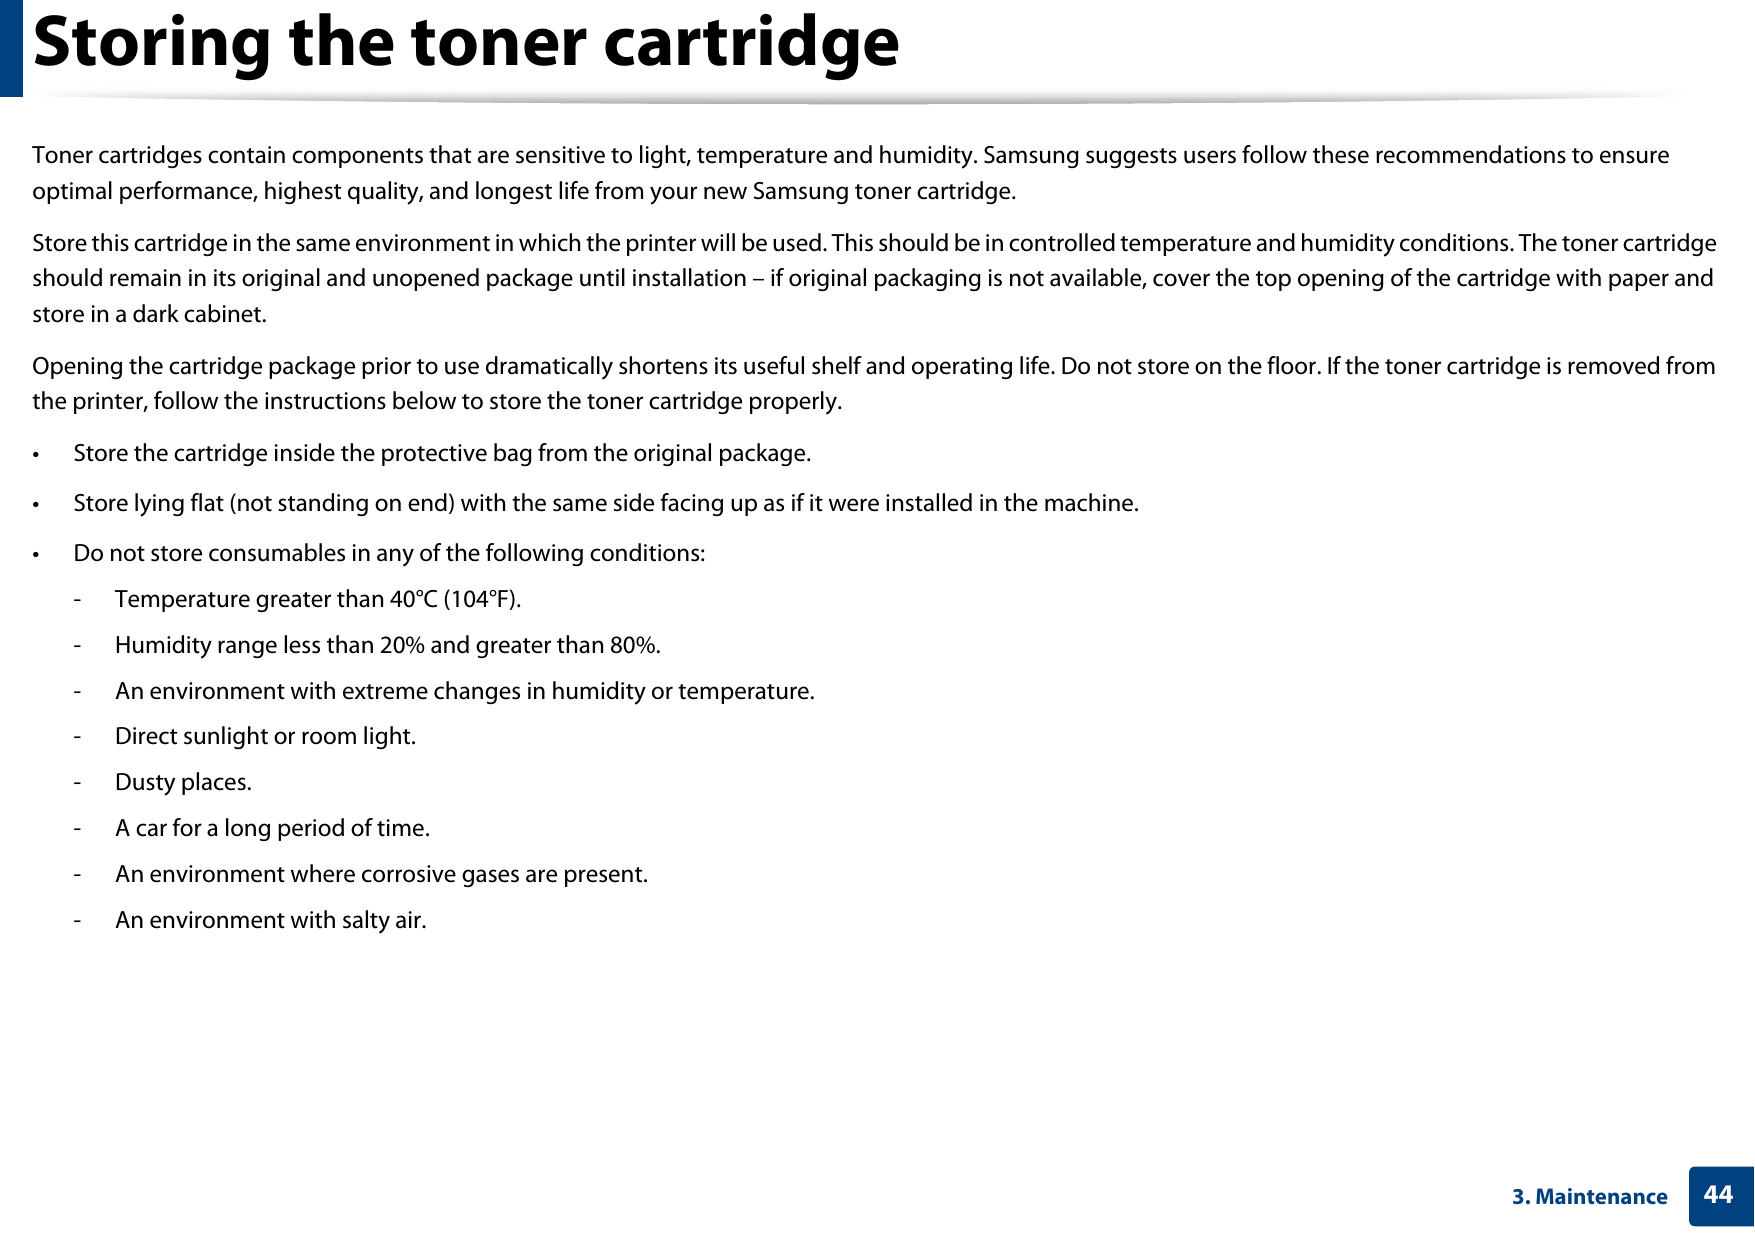 443. MaintenanceStoring the toner cartridgeToner cartridges contain components that are sensitive to light, temperature and humidity. Samsung suggests users follow these recommendations to ensure optimal performance, highest quality, and longest life from your new Samsung toner cartridge.Store this cartridge in the same environment in which the printer will be used. This should be in controlled temperature and humidity conditions. The toner cartridge should remain in its original and unopened package until installation – if original packaging is not available, cover the top opening of the cartridge with paper and store in a dark cabinet.Opening the cartridge package prior to use dramatically shortens its useful shelf and operating life. Do not store on the floor. If the toner cartridge is removed from the printer, follow the instructions below to store the toner cartridge properly.• Store the cartridge inside the protective bag from the original package. • Store lying flat (not standing on end) with the same side facing up as if it were installed in the machine.• Do not store consumables in any of the following conditions:- Temperature greater than 40°C (104°F).- Humidity range less than 20% and greater than 80%.- An environment with extreme changes in humidity or temperature.- Direct sunlight or room light.- Dusty places.- A car for a long period of time.- An environment where corrosive gases are present.- An environment with salty air.